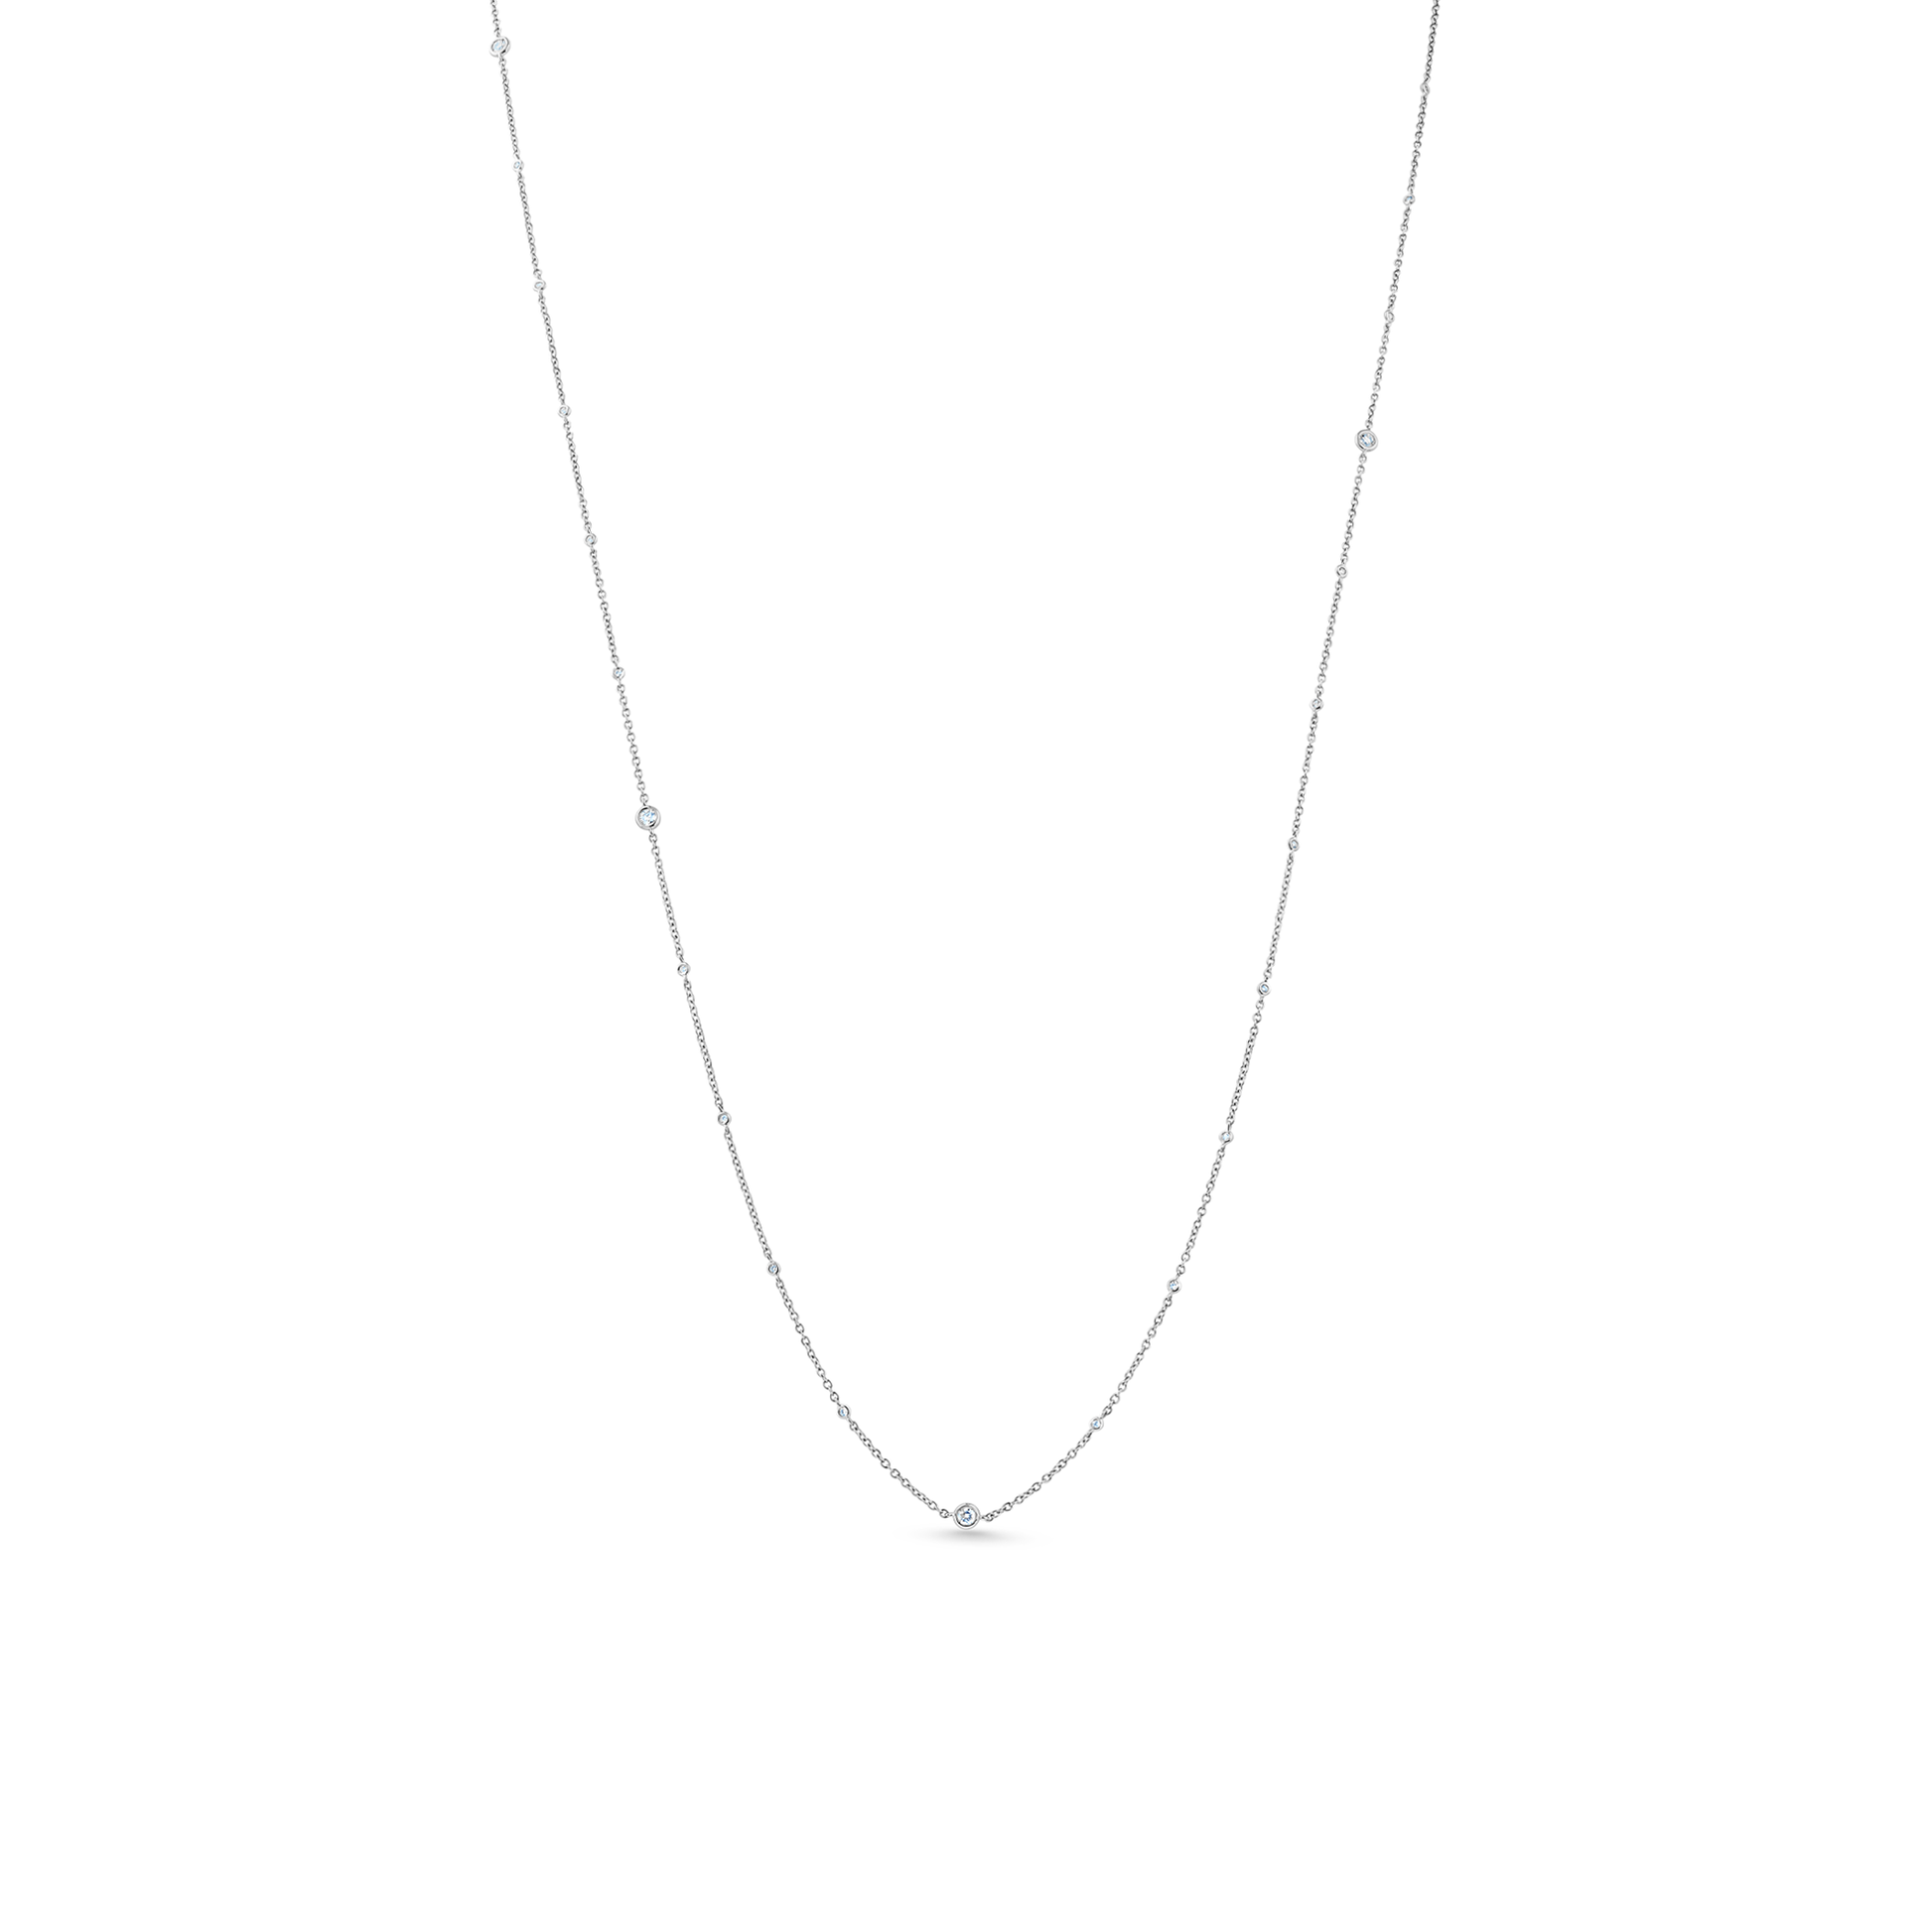 Oliver Heemeyer Star Light diamond necklace mixed 89,0 cm 0.40 ct. made of 18k white gold.